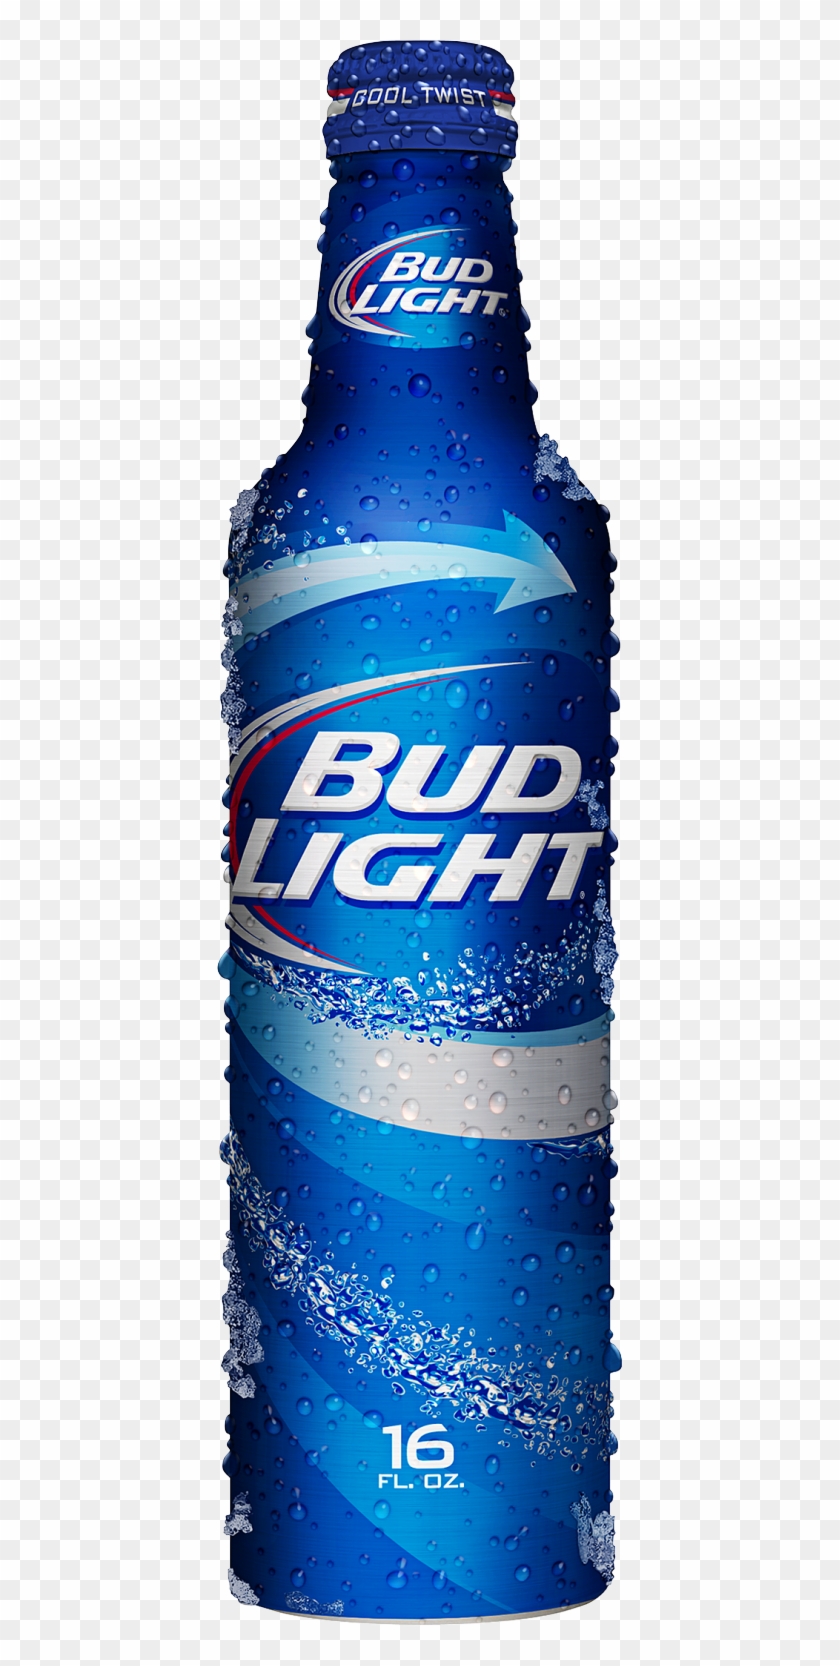 bud light hd png download 406x1586 770883 pngfind bud light hd png download 406x1586